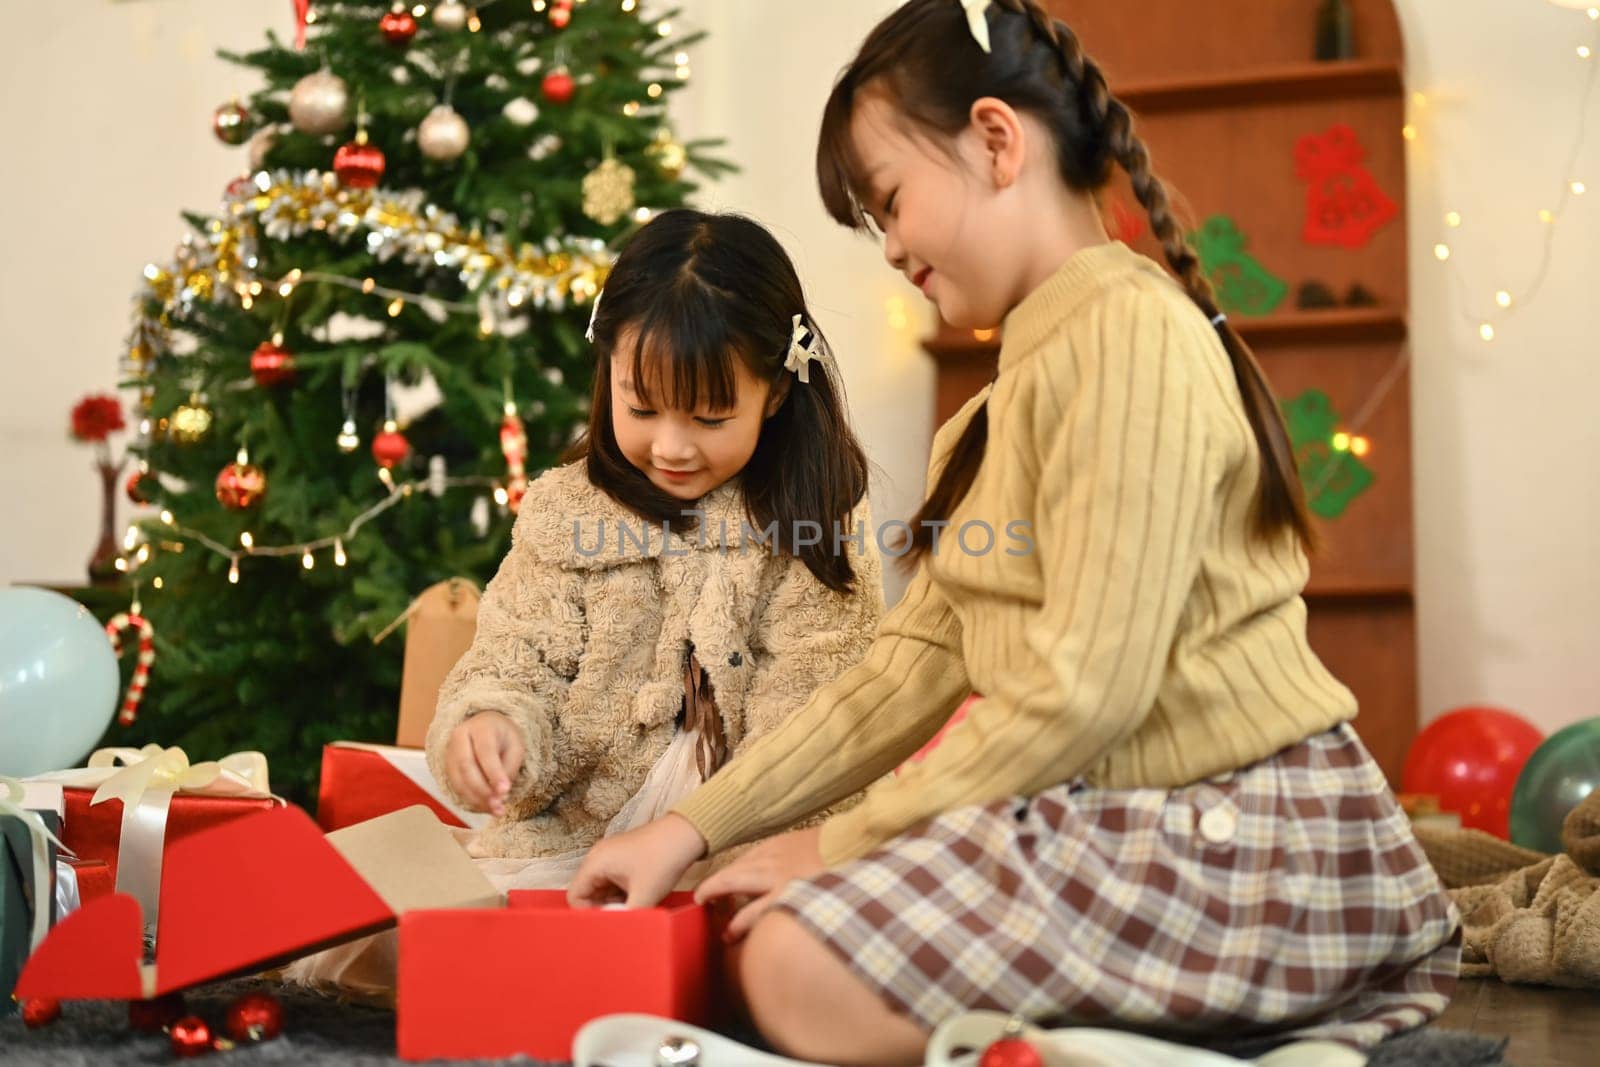 Charming siblings sitting on floor in decorated living room opening Christmas gift. Holidays and childhood concept by prathanchorruangsak